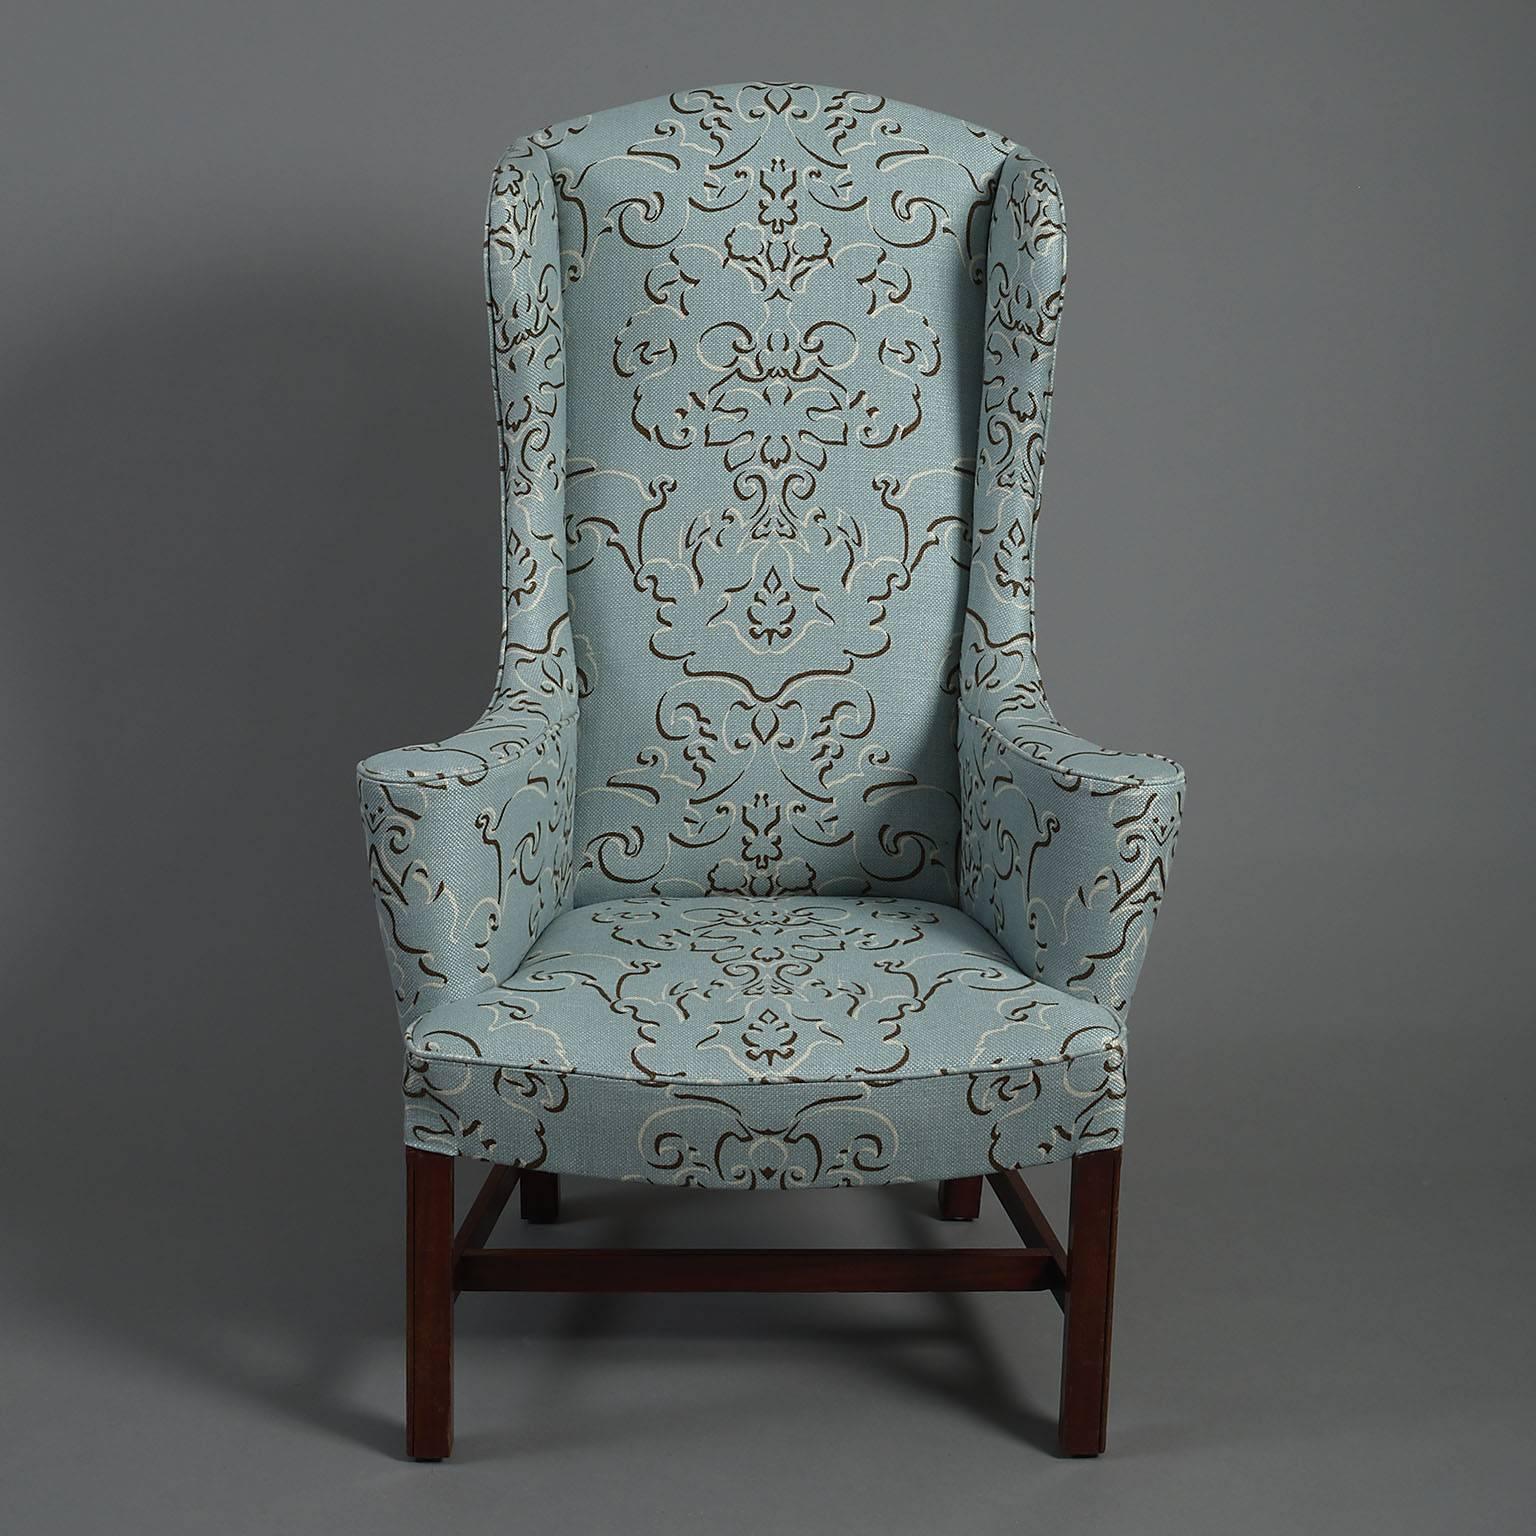 High wingback armchair in George III style.
The high arched-back with outswept arms above a dished seat raised on canted mahogany legs joined by 